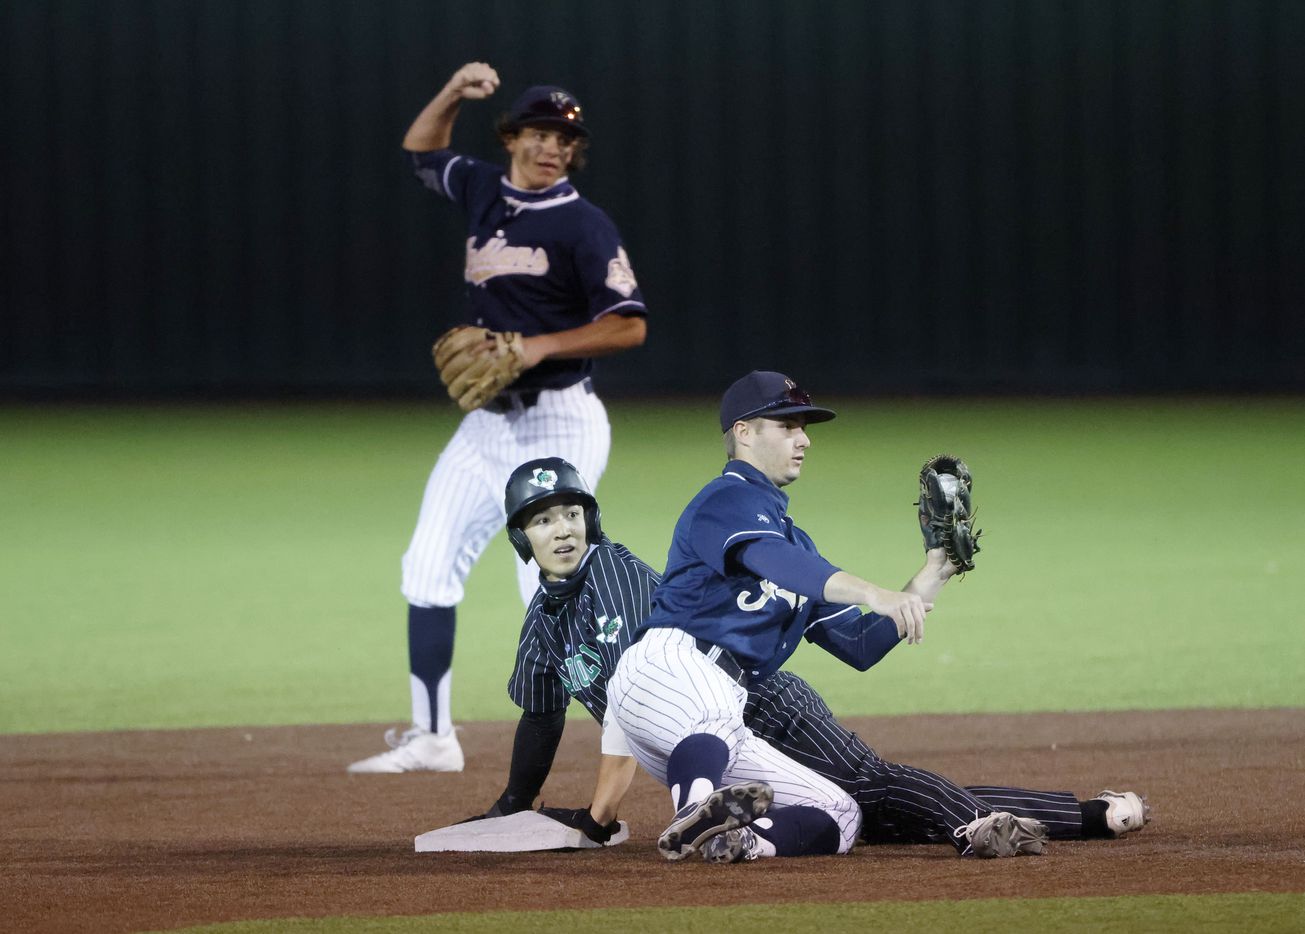 Southlake’s Max Reyes is called safe at second after an attempted tag by Keller’s Todd Baffa (2) as Mike Dattalo reacts, during a Class District 4-6A baseball game in Southlake, Texas on March 19, 2021. (Michael Ainsworth/Special Contributor)